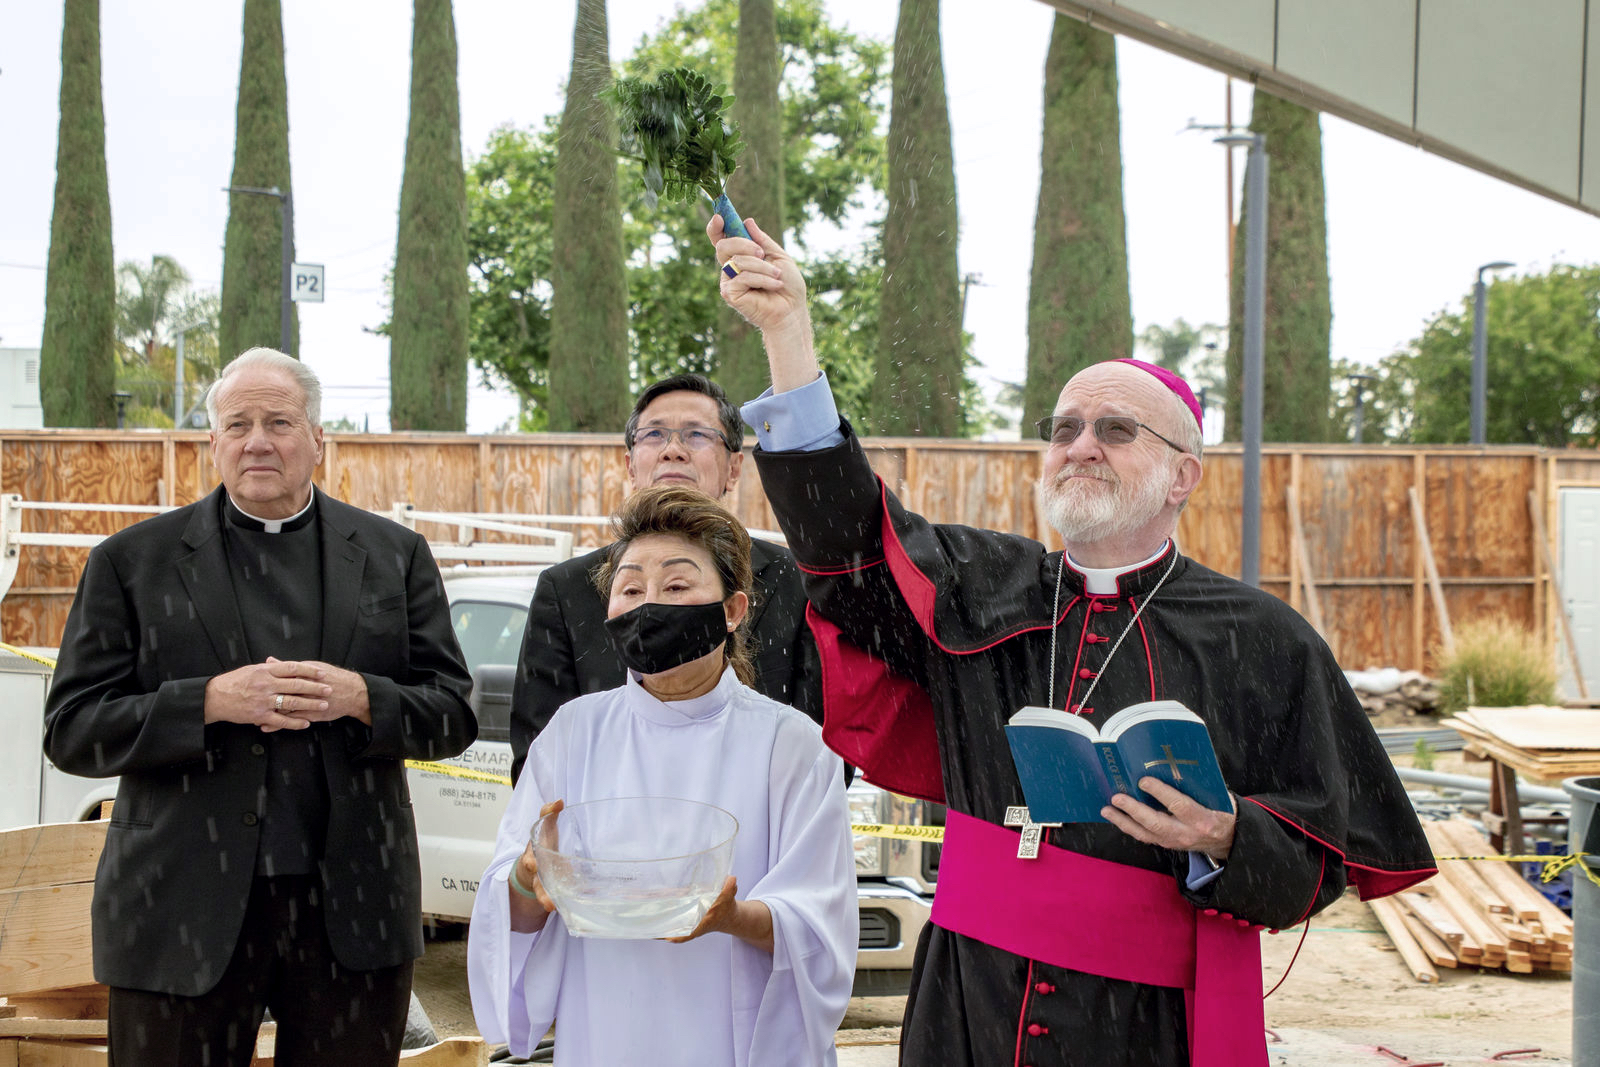 Bishop Kevin Vann blessing the Our Lady of La Vang sculpture during its installation. Photo courtesy Diocese of Orange. Note: Photo taken during construction.